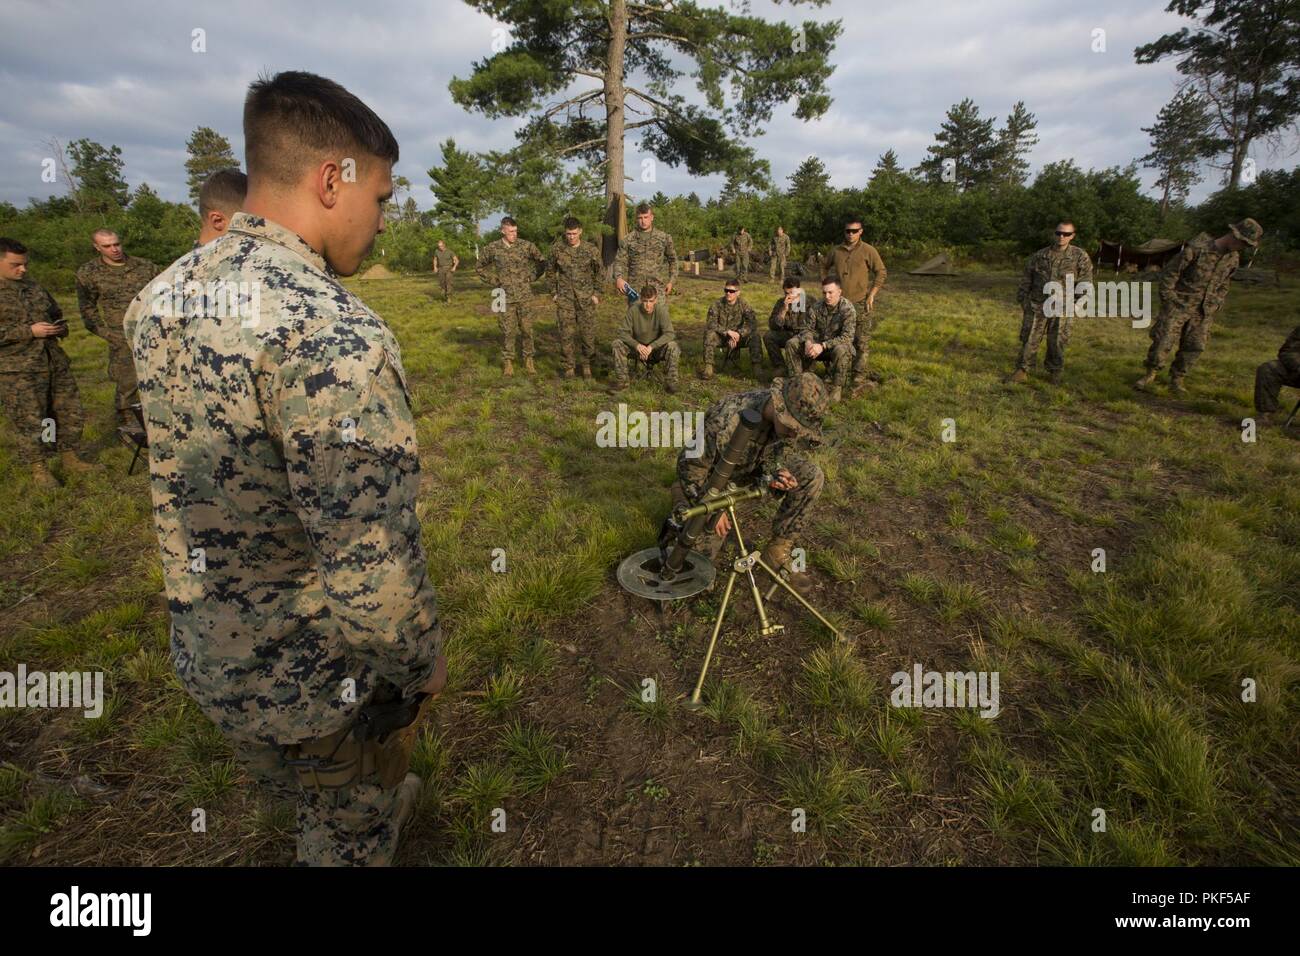 Mortarmen with 3rd Battalion, 25th Marine Regiment, go over setting up a M224 60mm Mortar during Exercise Northern Strike at Camp Grayling, Mich., Aug. 7, 2018. Northern Strike’s mission is to exercise participating units’ full-spectrum of capabilities through realistic, cost-effective joint fires training in an adaptable environment, with an emphasis on joint and coalition force cooperation. Stock Photo